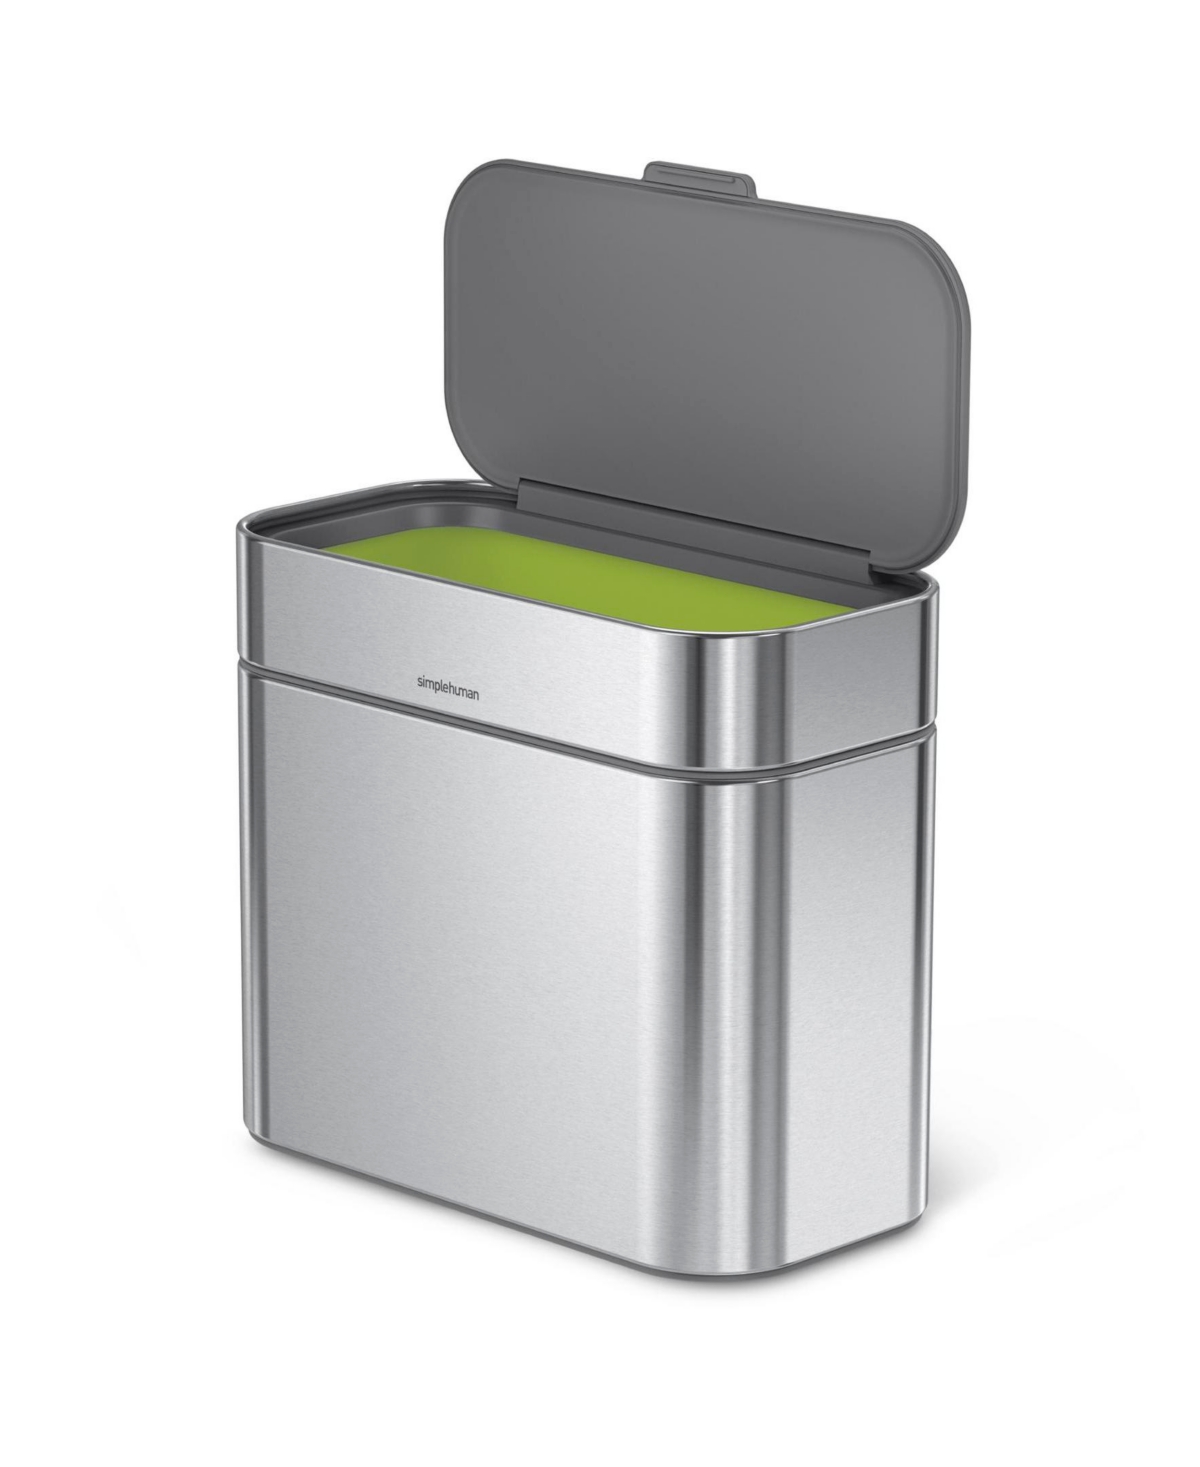 Compost Caddy, 4 Liter - Brushed Stainless Steel